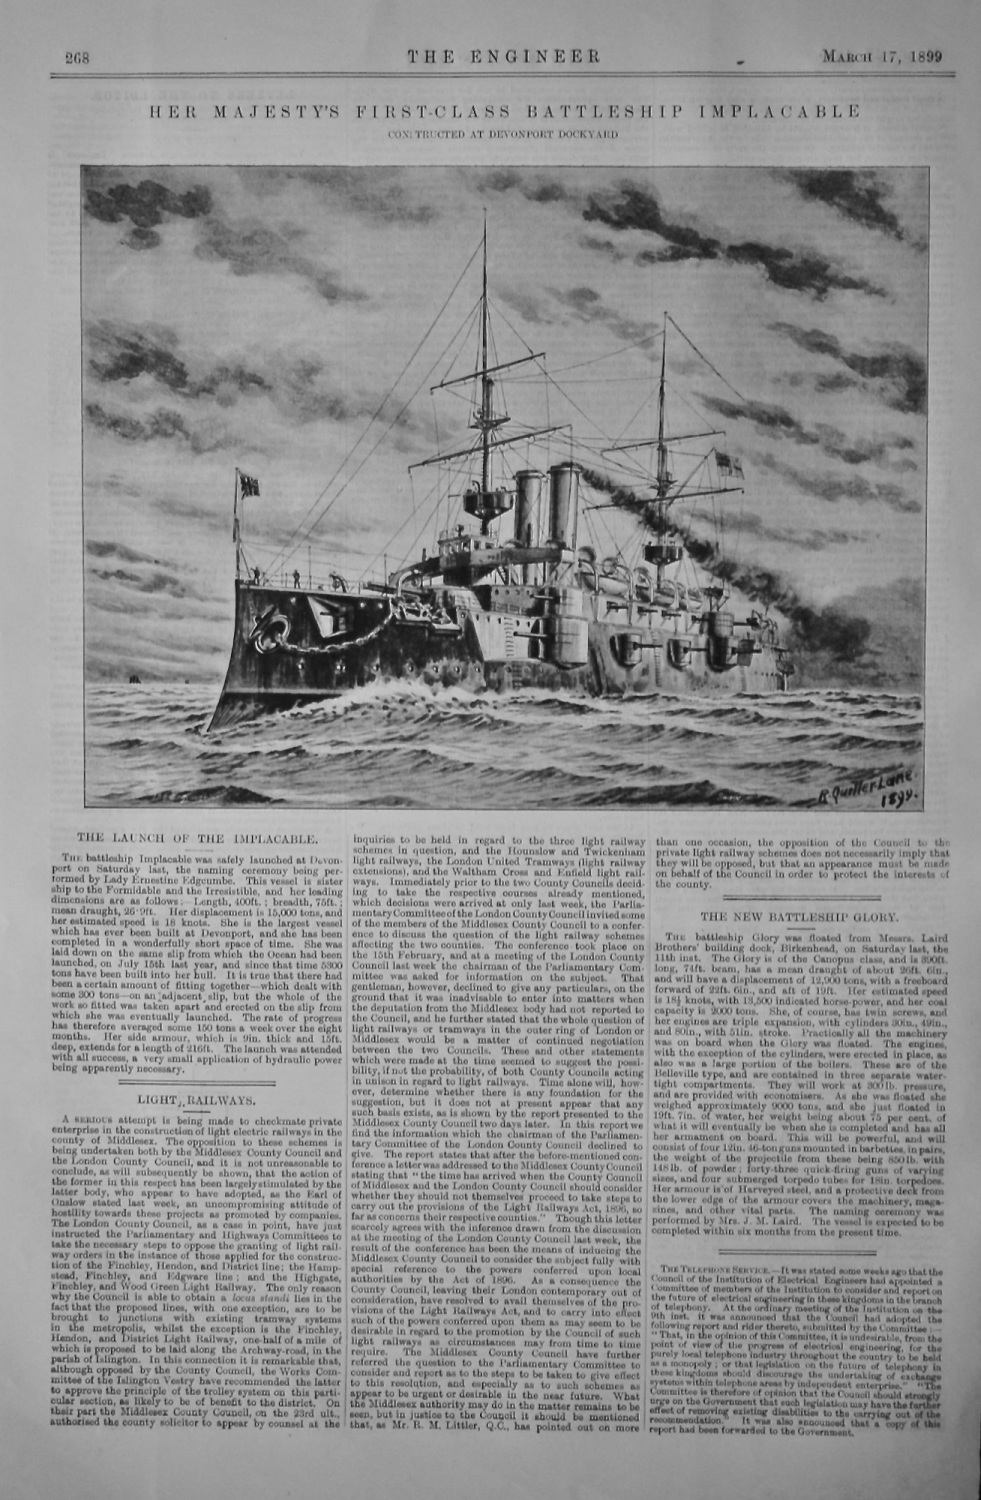 Her Majesty's First-Class Battleship Implacable.  1899.